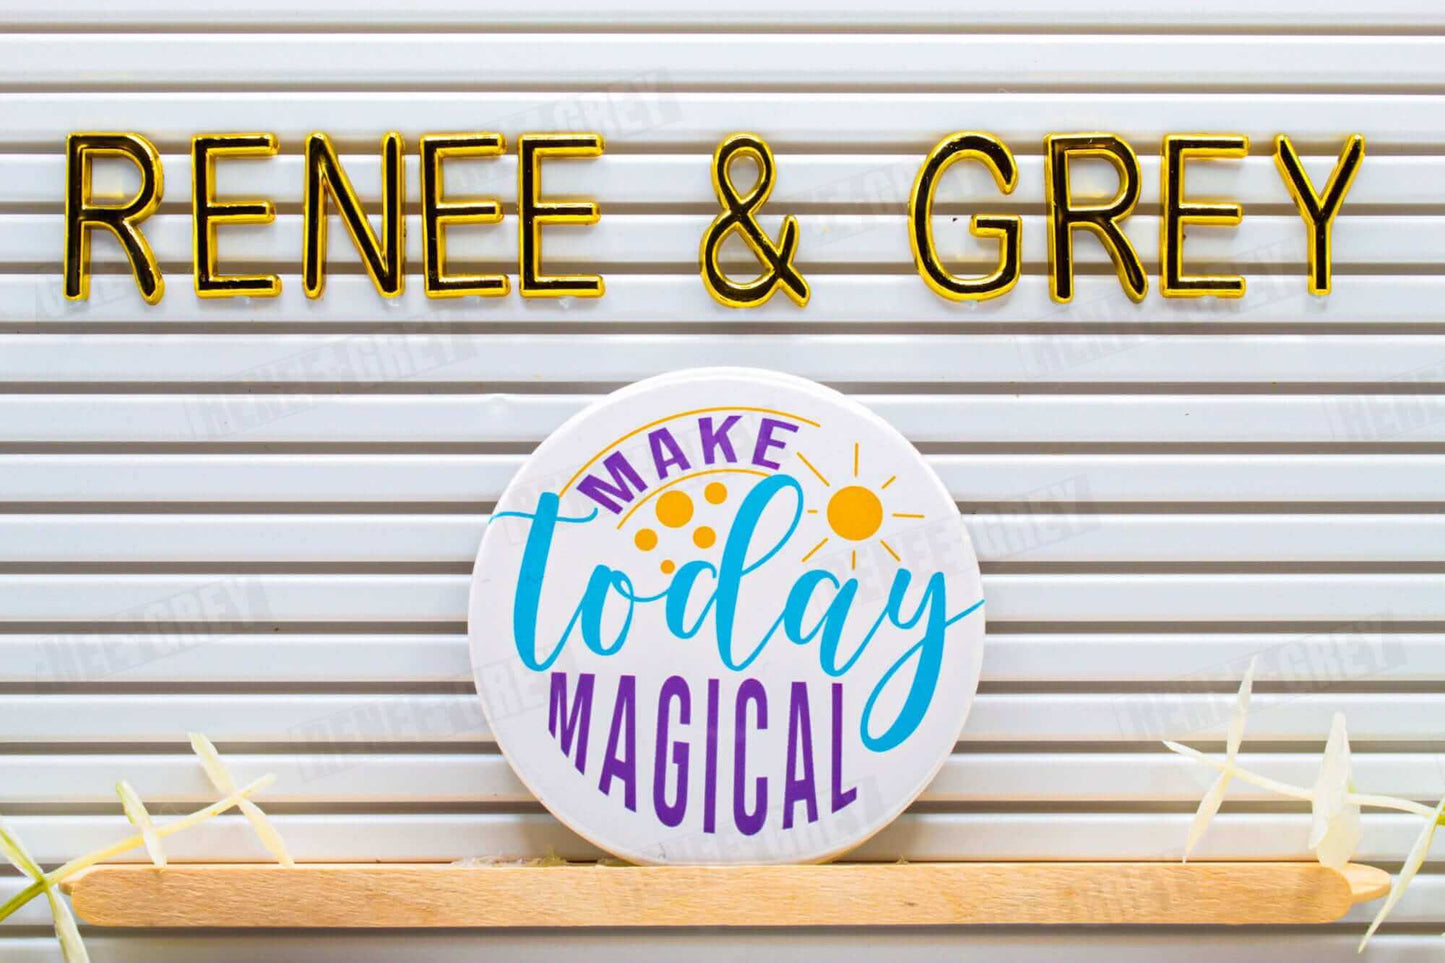 Make Today Magical Pinback Buttons, pinback buttons, pinback button set, custom button pins, pin back buttons, button badge